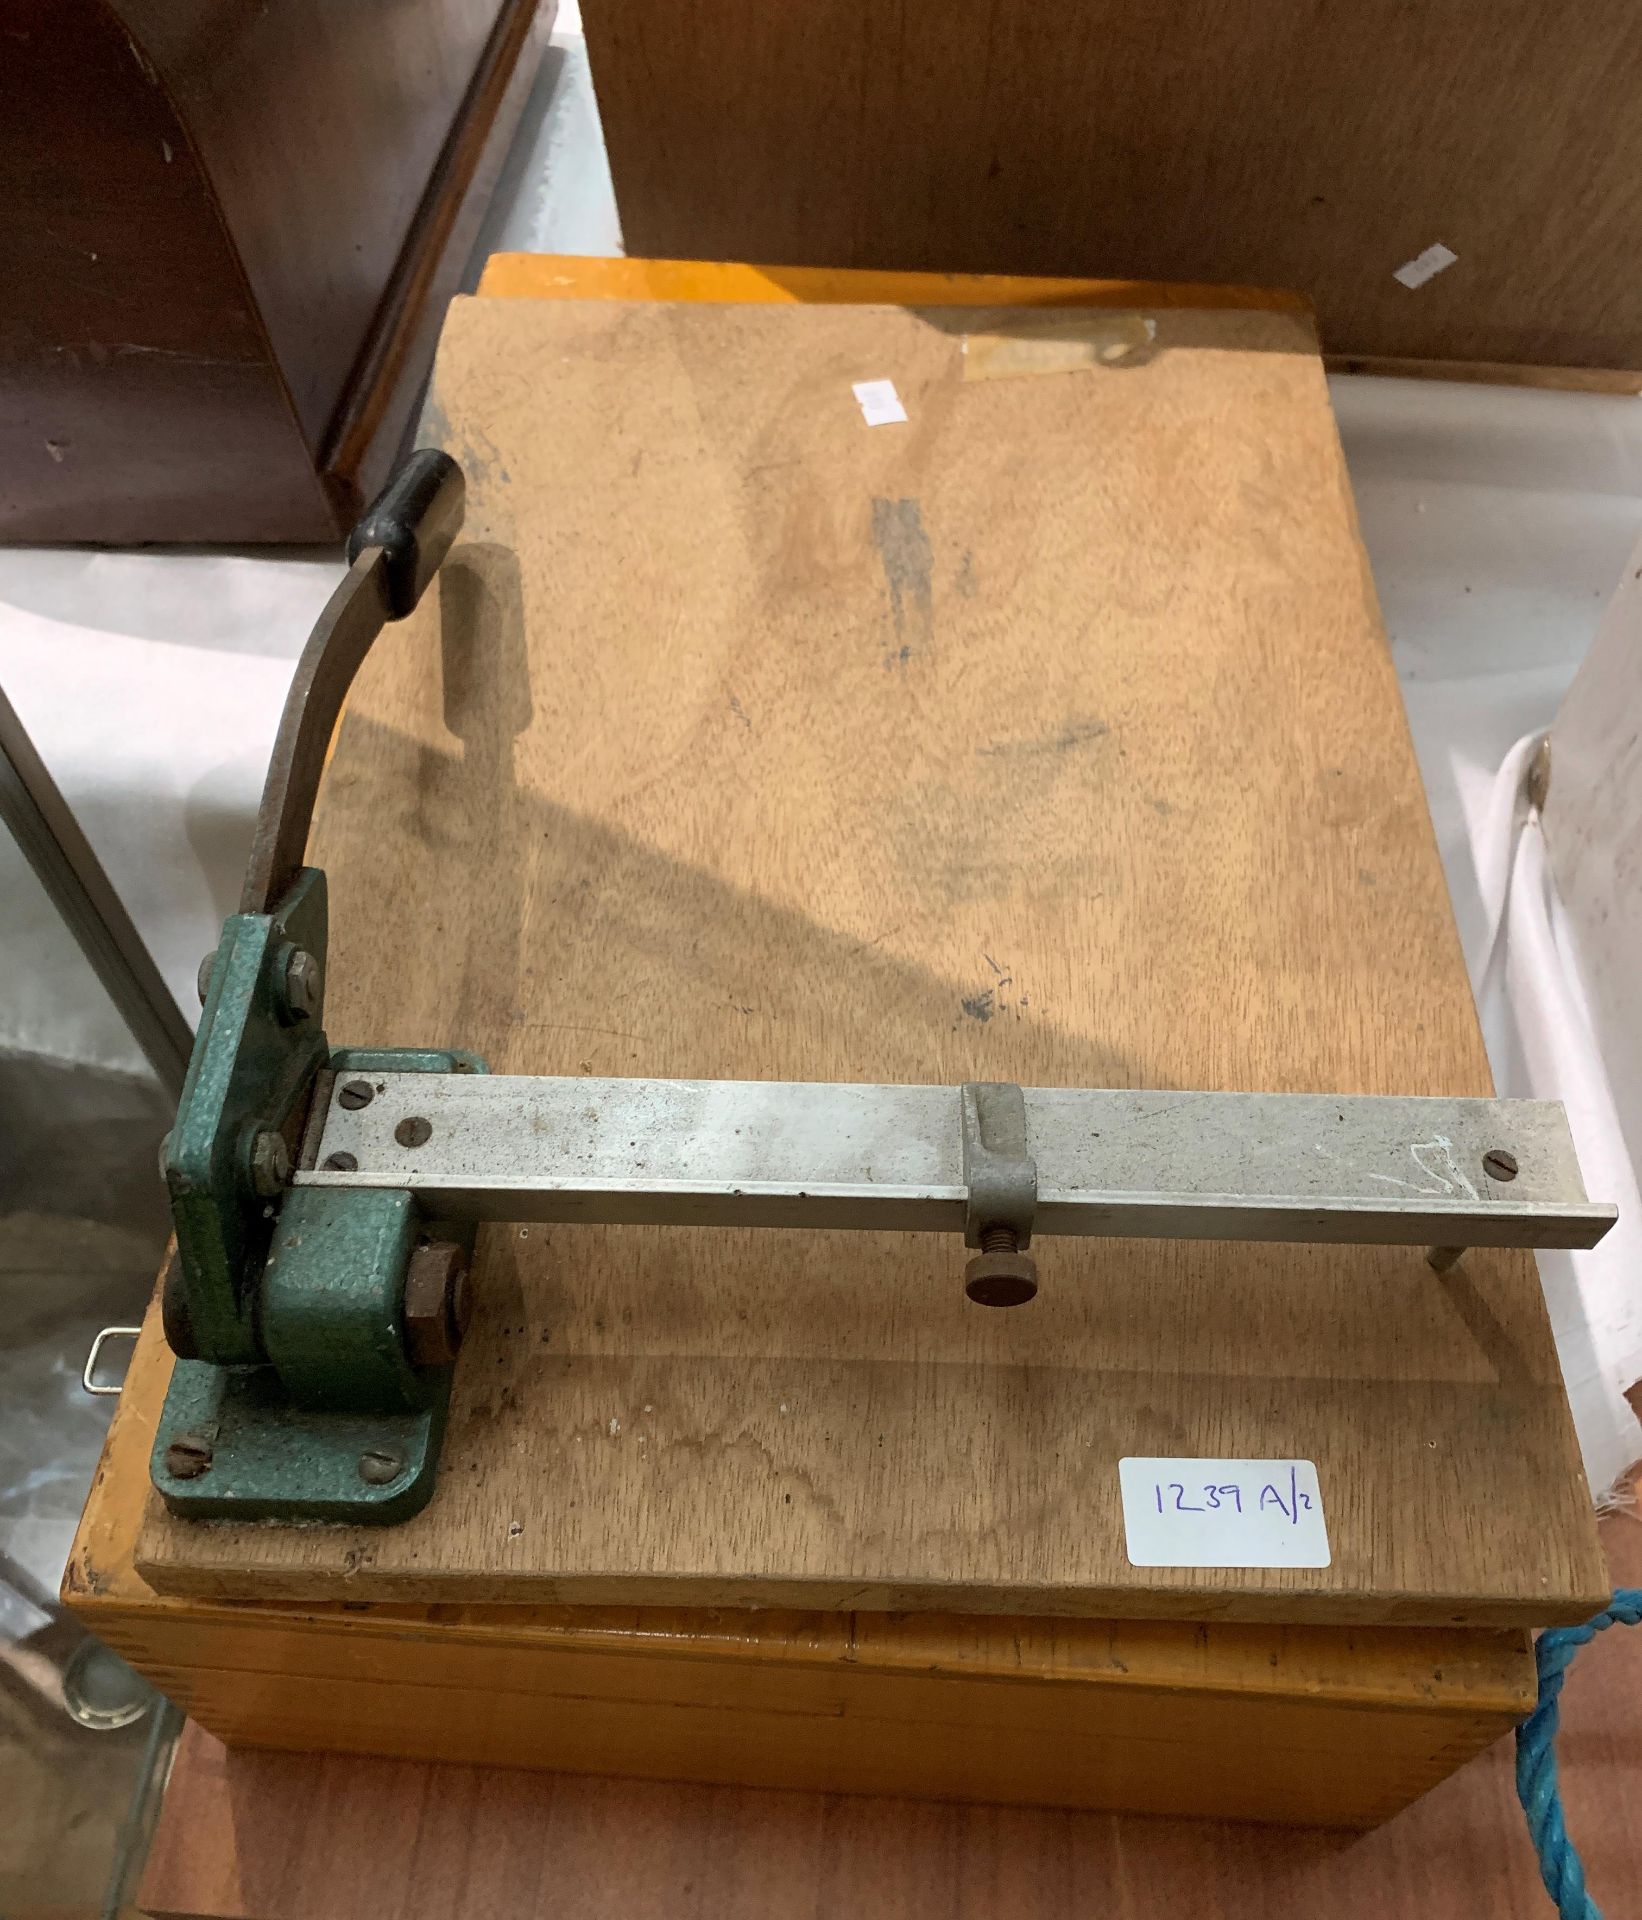 A small manual guillotine and an empty wooden laboratory sample box